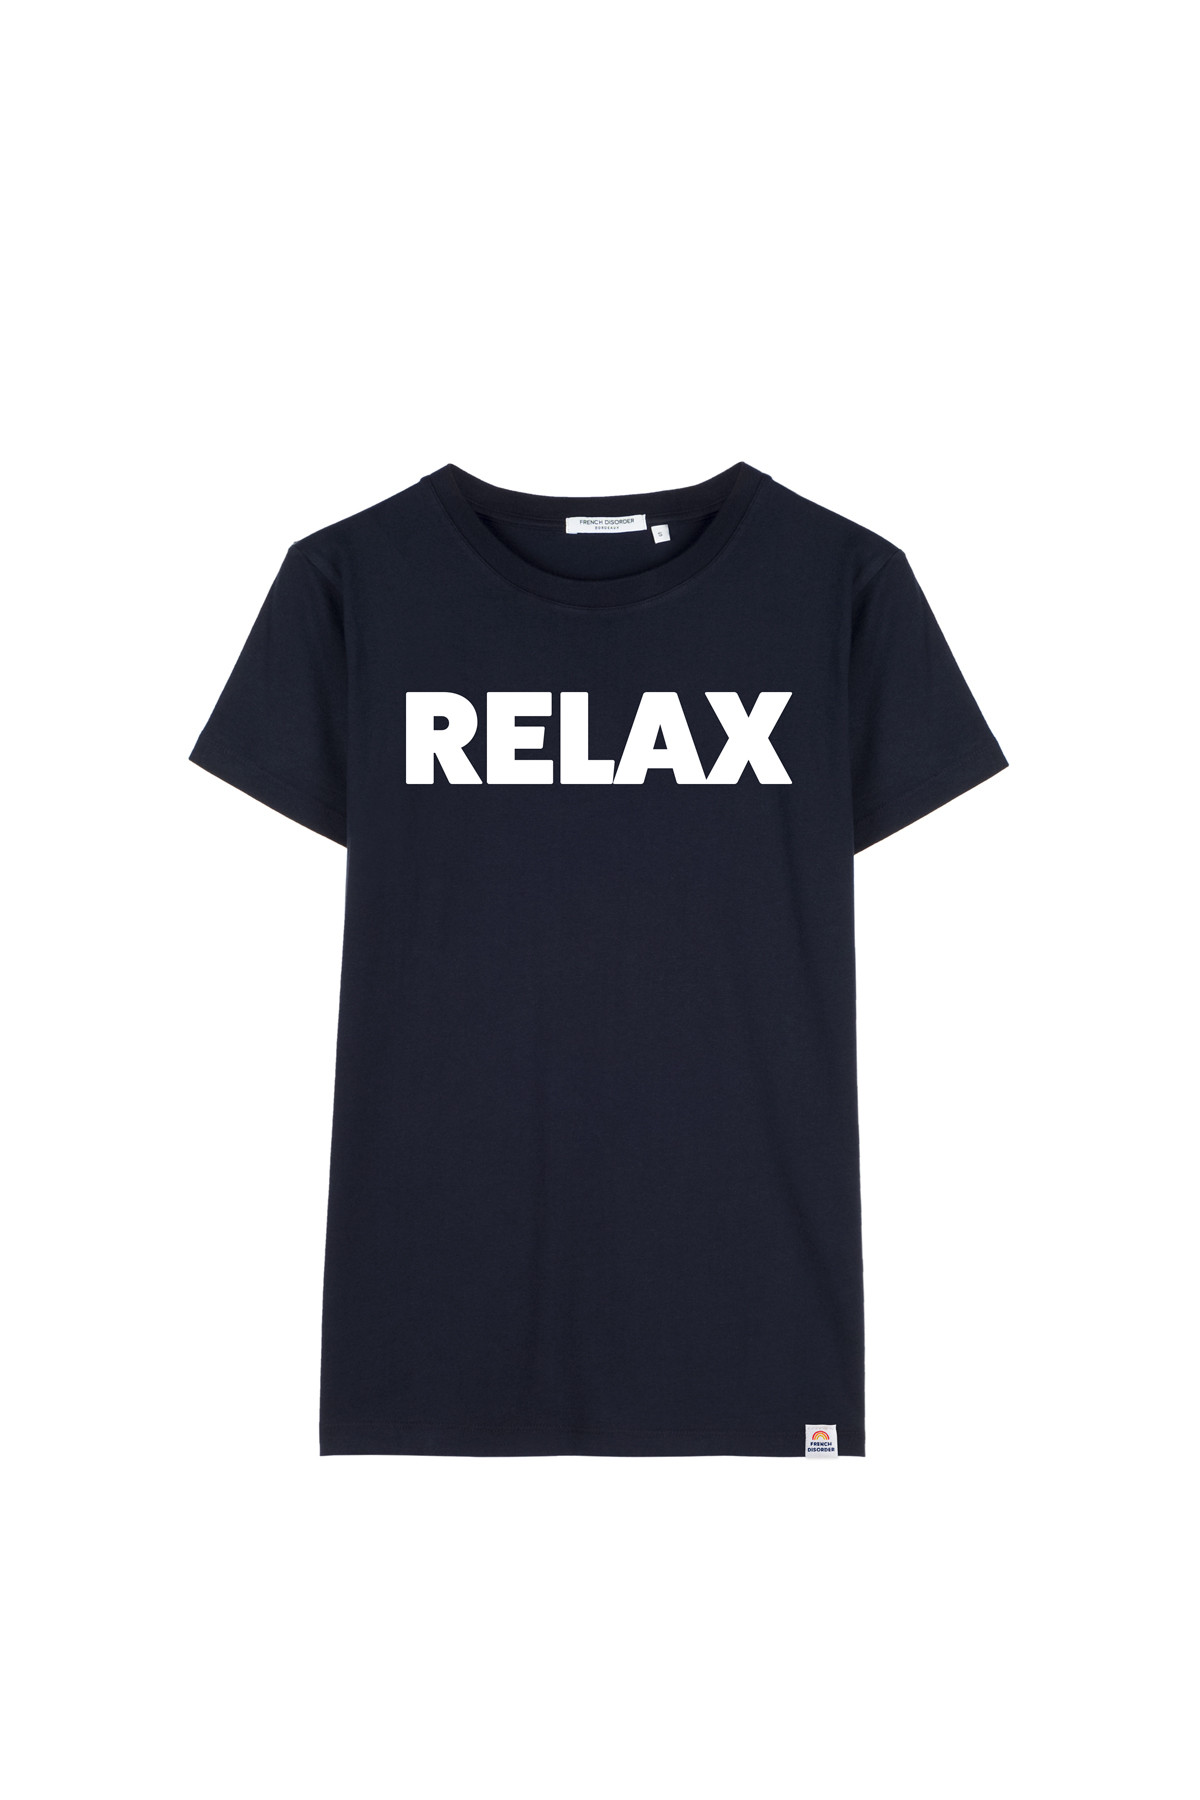 Photo de T-SHIRTS COL ROND Tshirt RELAX chez French Disorder